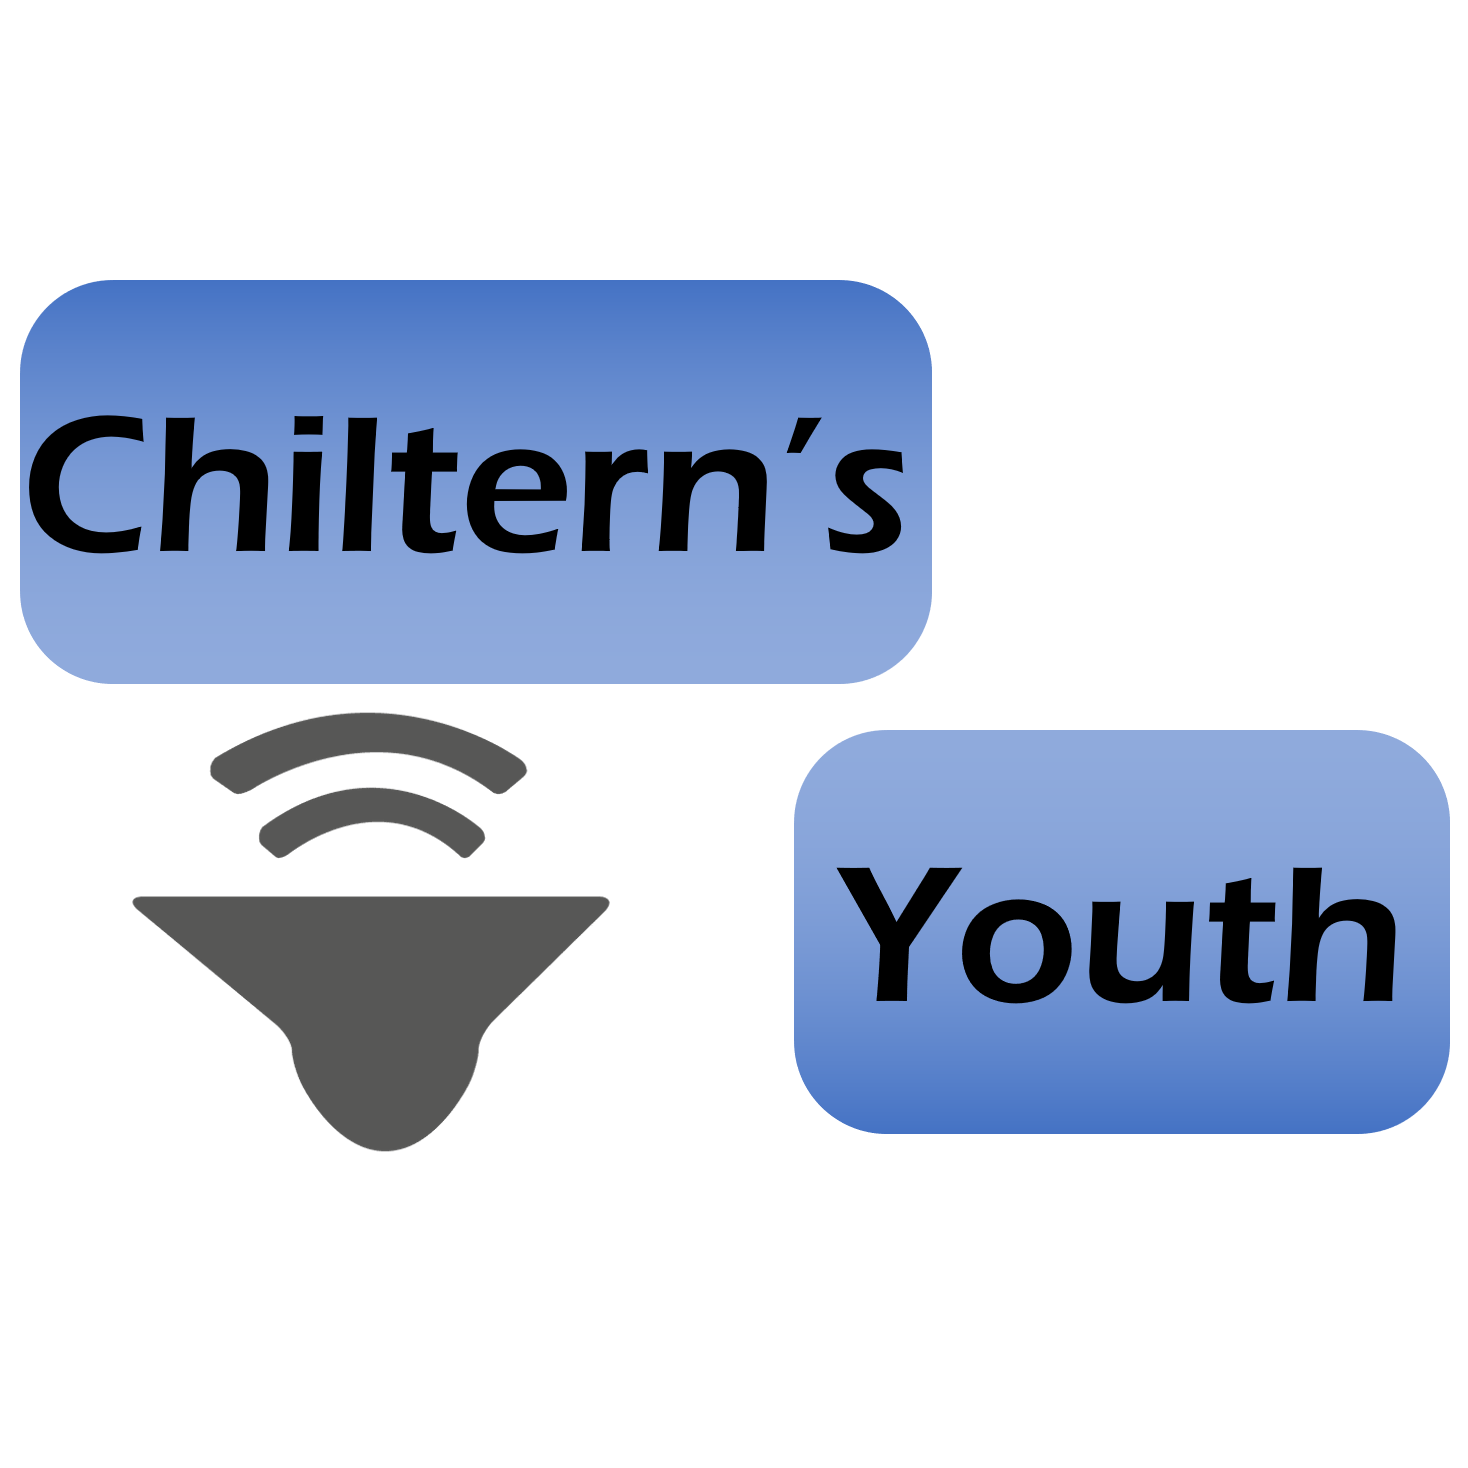 Chiltern's Youth